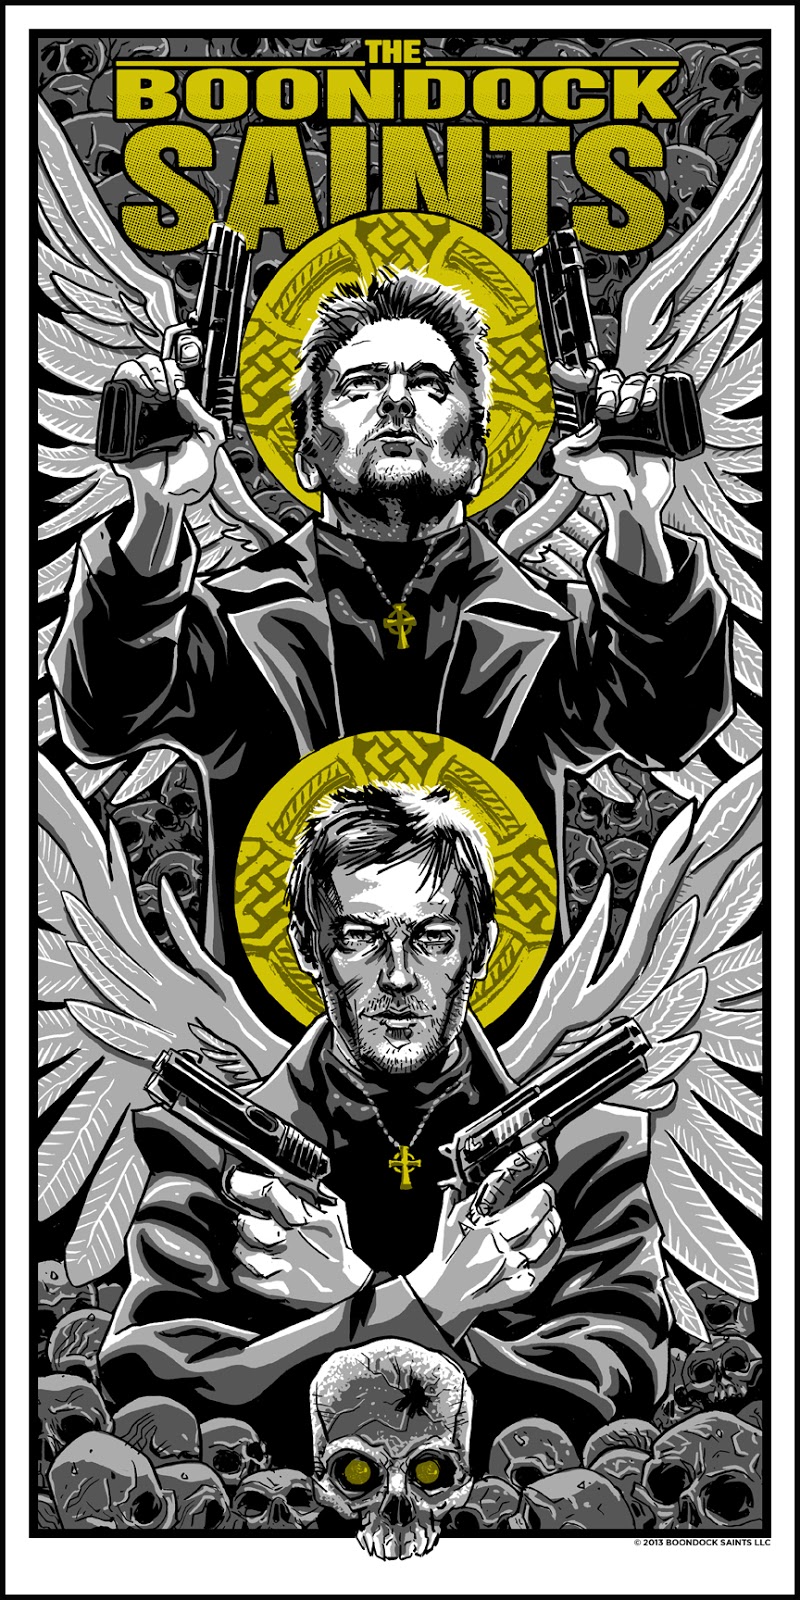 INSIDE THE ROCK POSTER FRAME BLOG: The Boondock Saints Poster by Tim ...